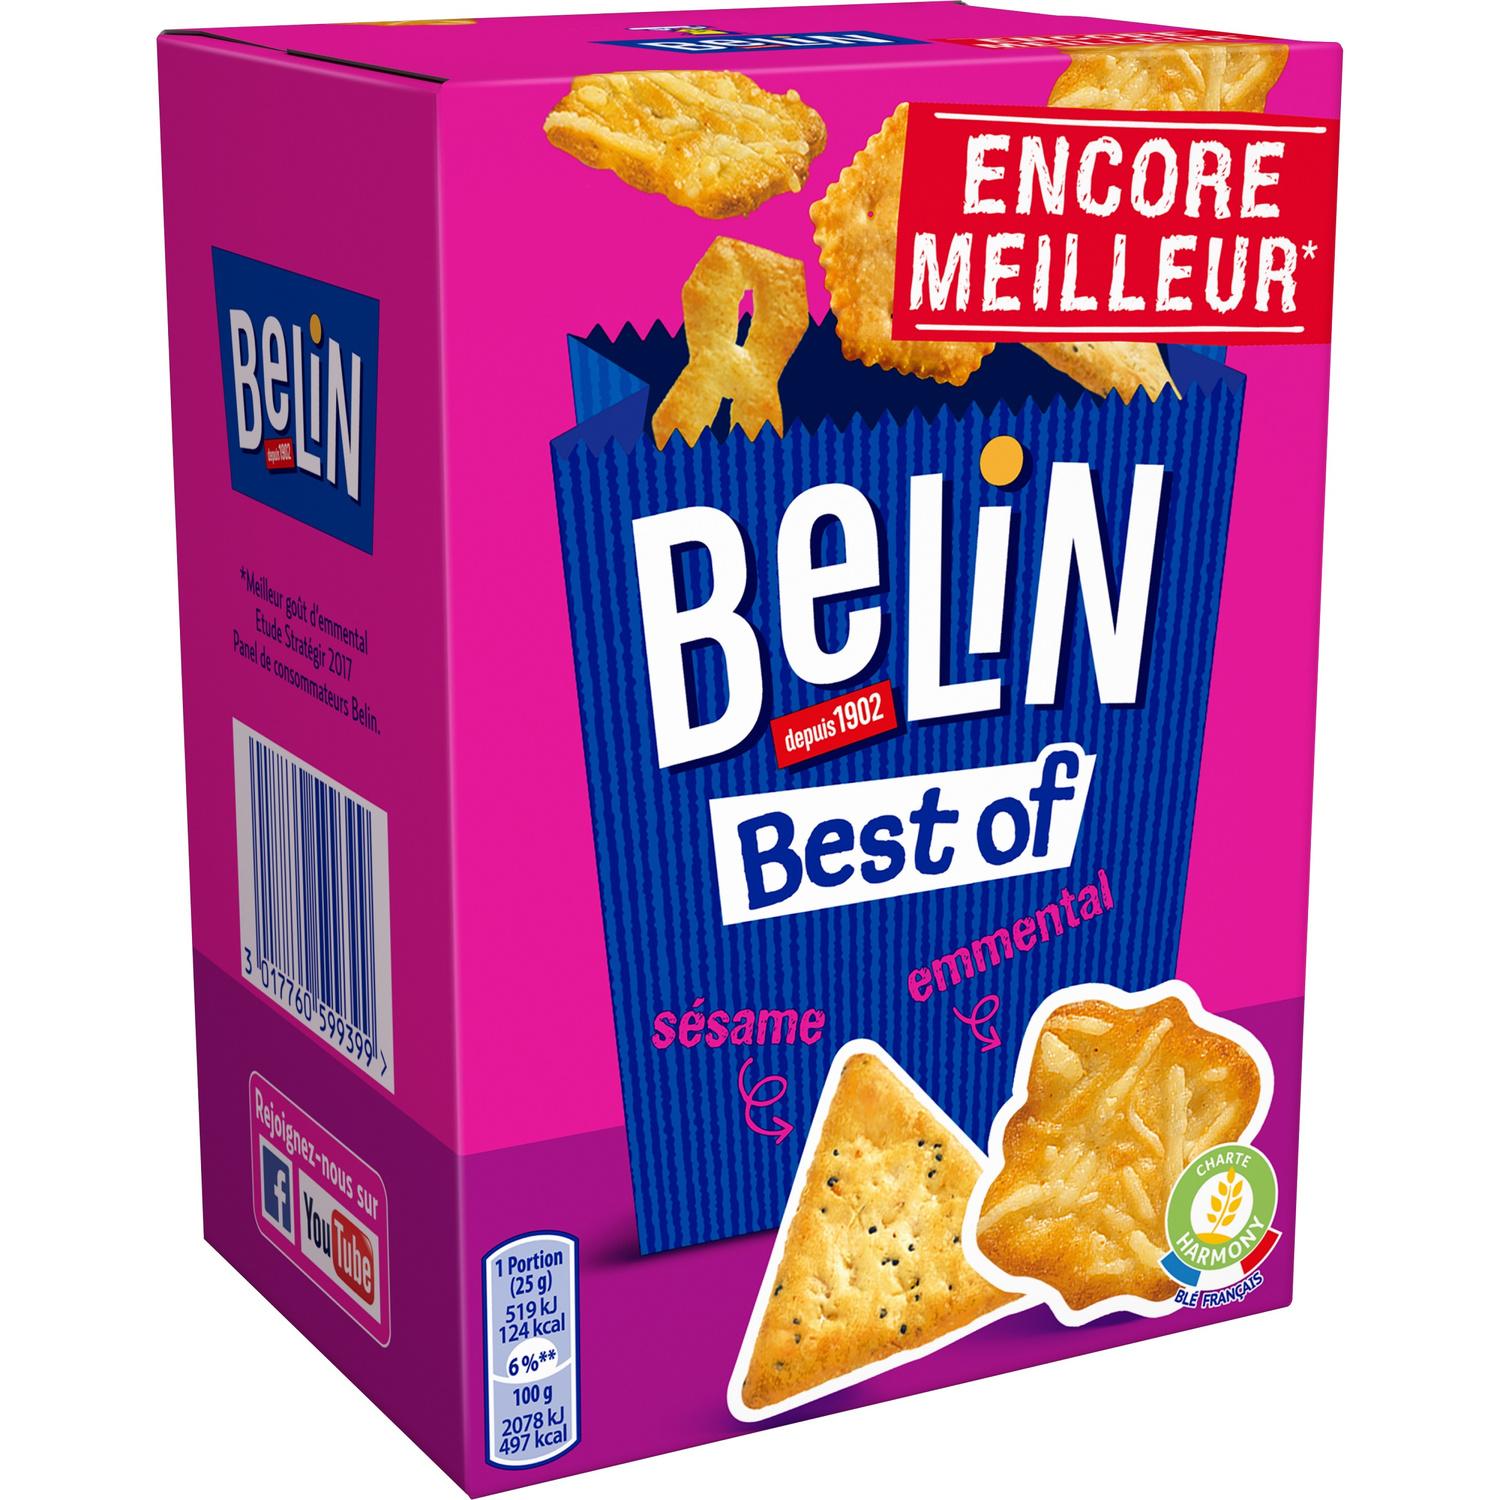 https://my-french-grocery.com/wp-content/uploads/2018/09/Belin-Best-Off.jpg